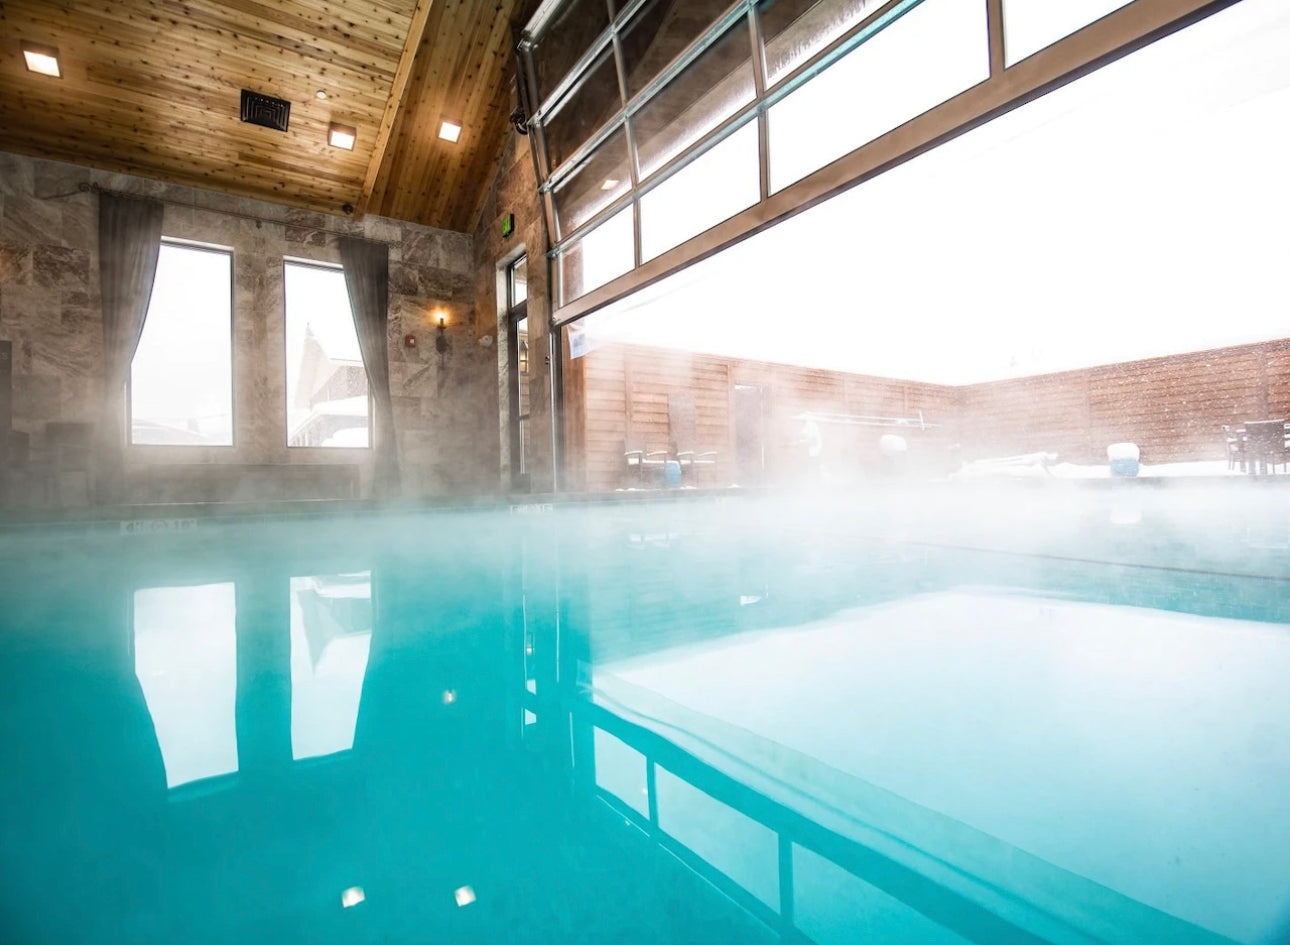  An indoor heated pool with steam rising off the water surface, featuring wood-paneled walls and ceiling, large windows allowing natural light, and a cozy, inviting atmosphere.